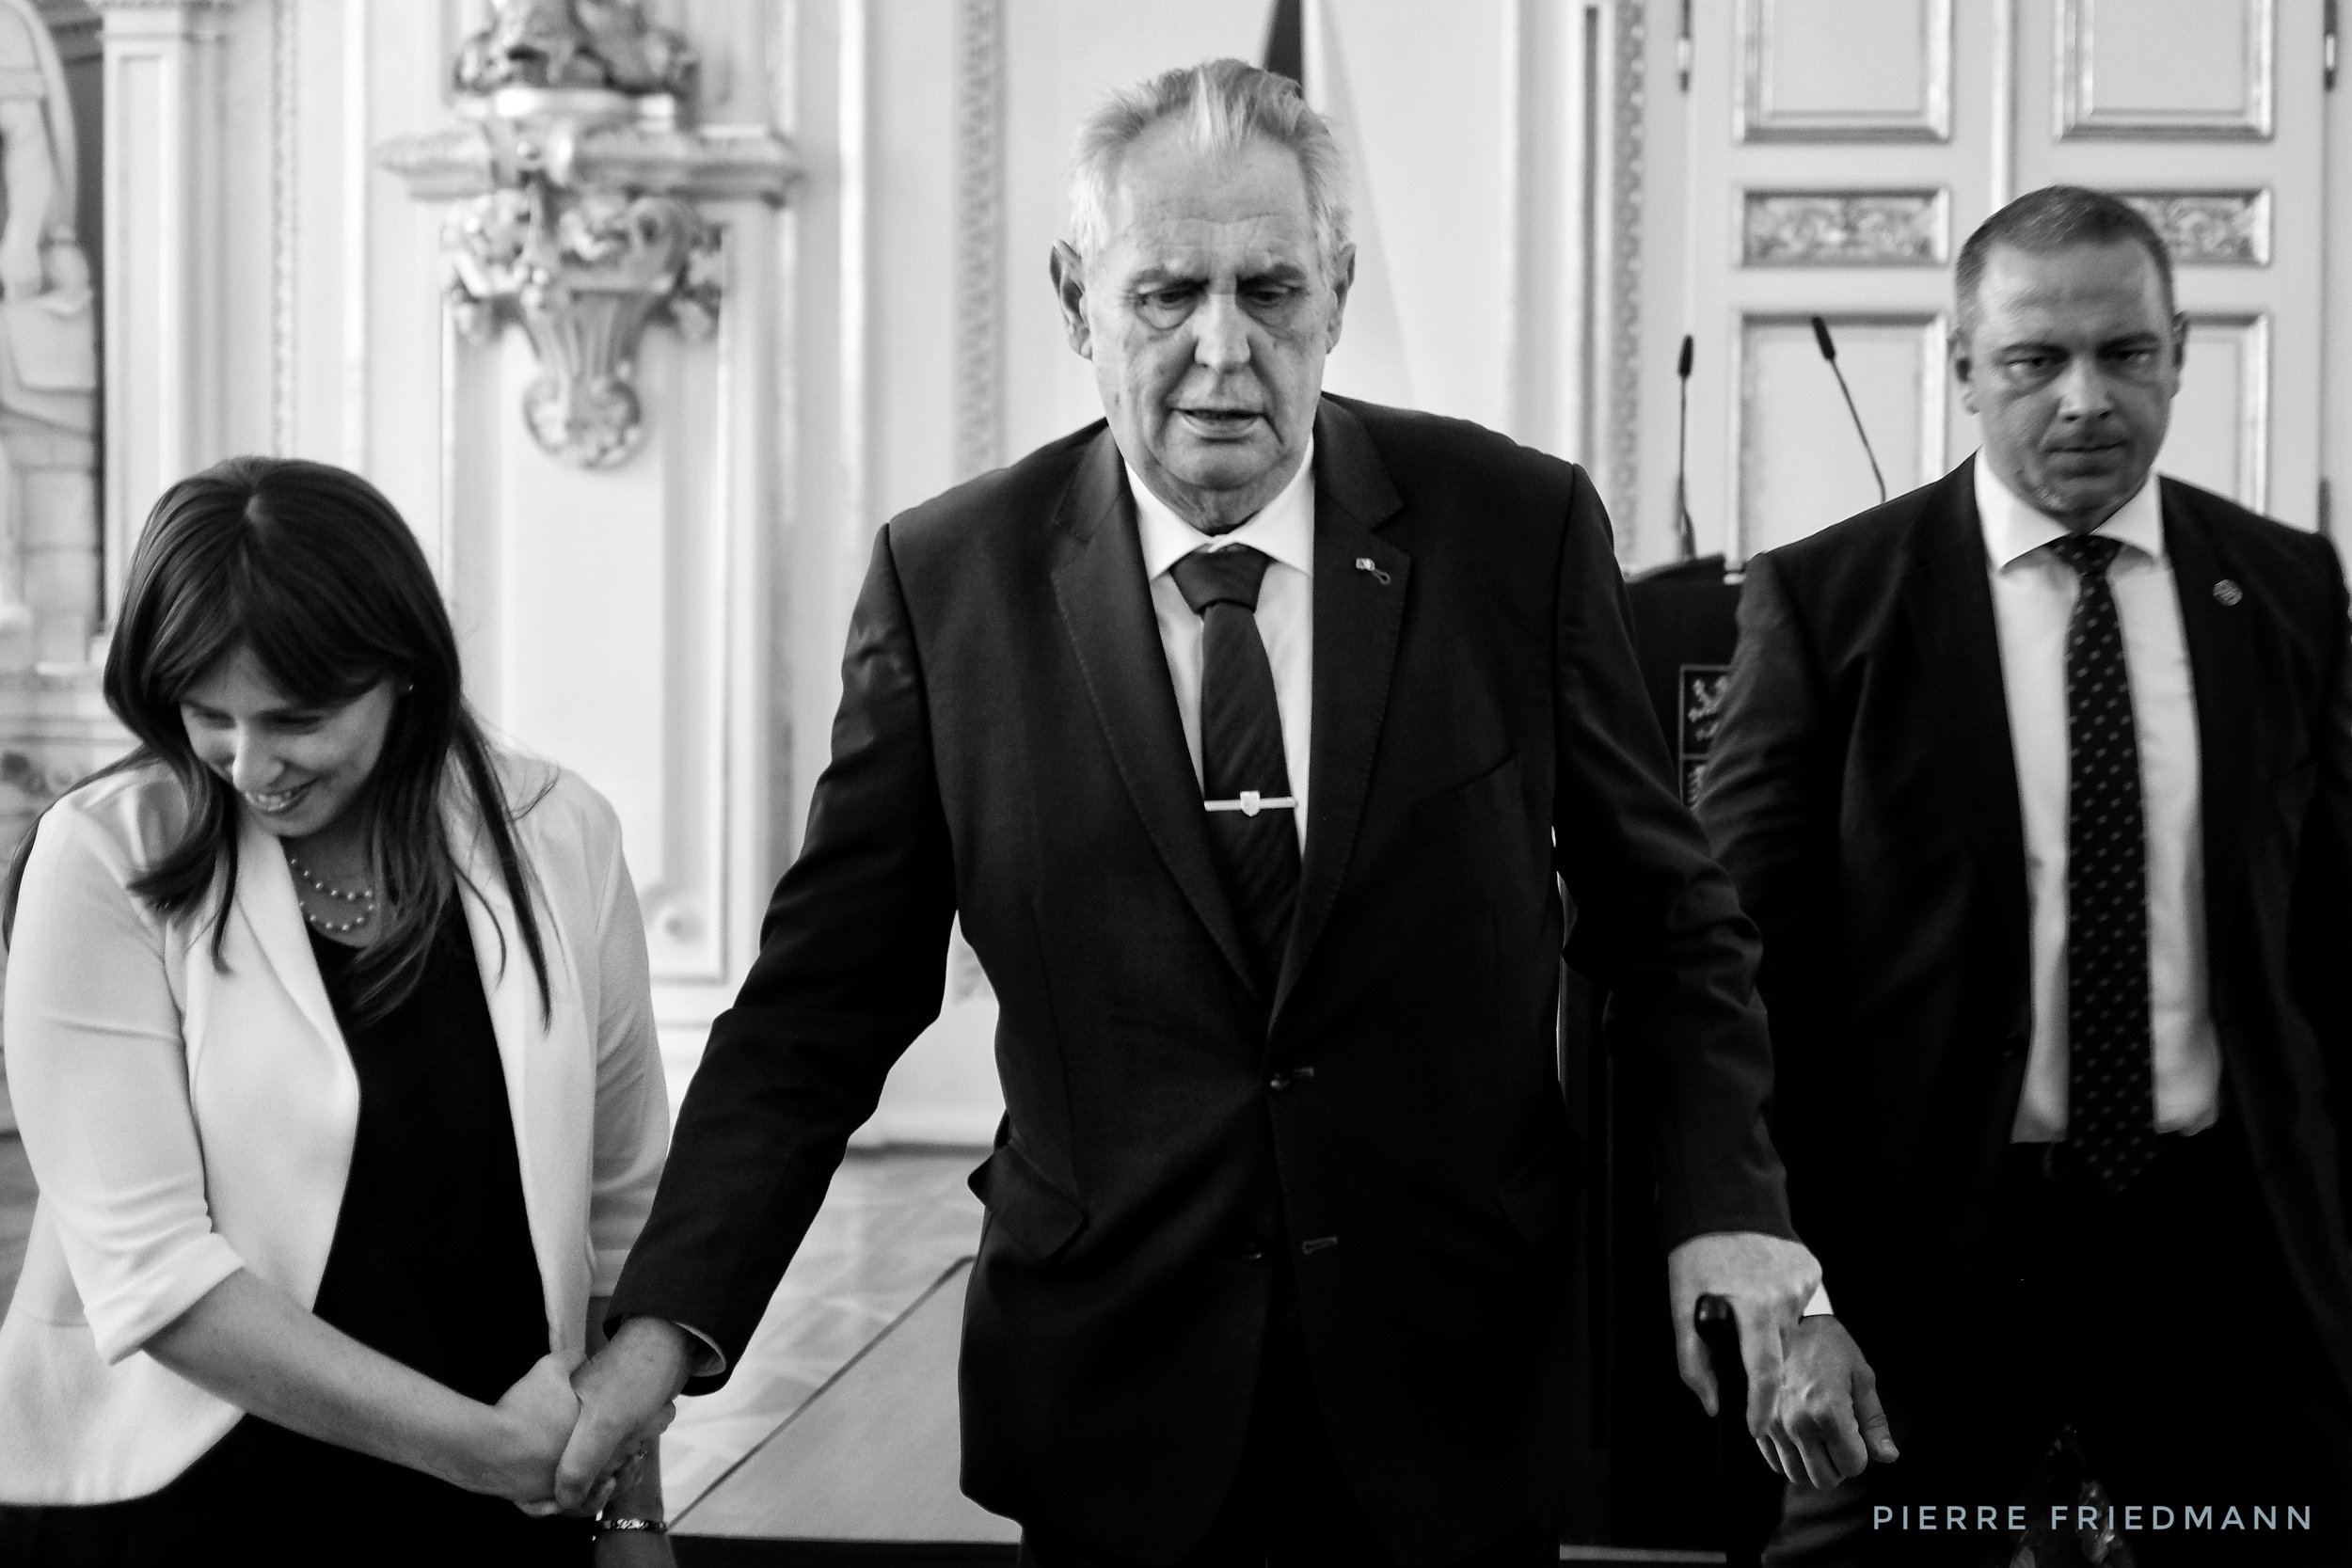  Israeli deputy minister of foreign affairs Zipi Hotoveli breaks protocol and helps Czech president Miloš Zeman get off the stage. The president hosted Israel’s 70th Independence Day celebration at the Spanish Hall of Prague Castle, 25.4.2018. 